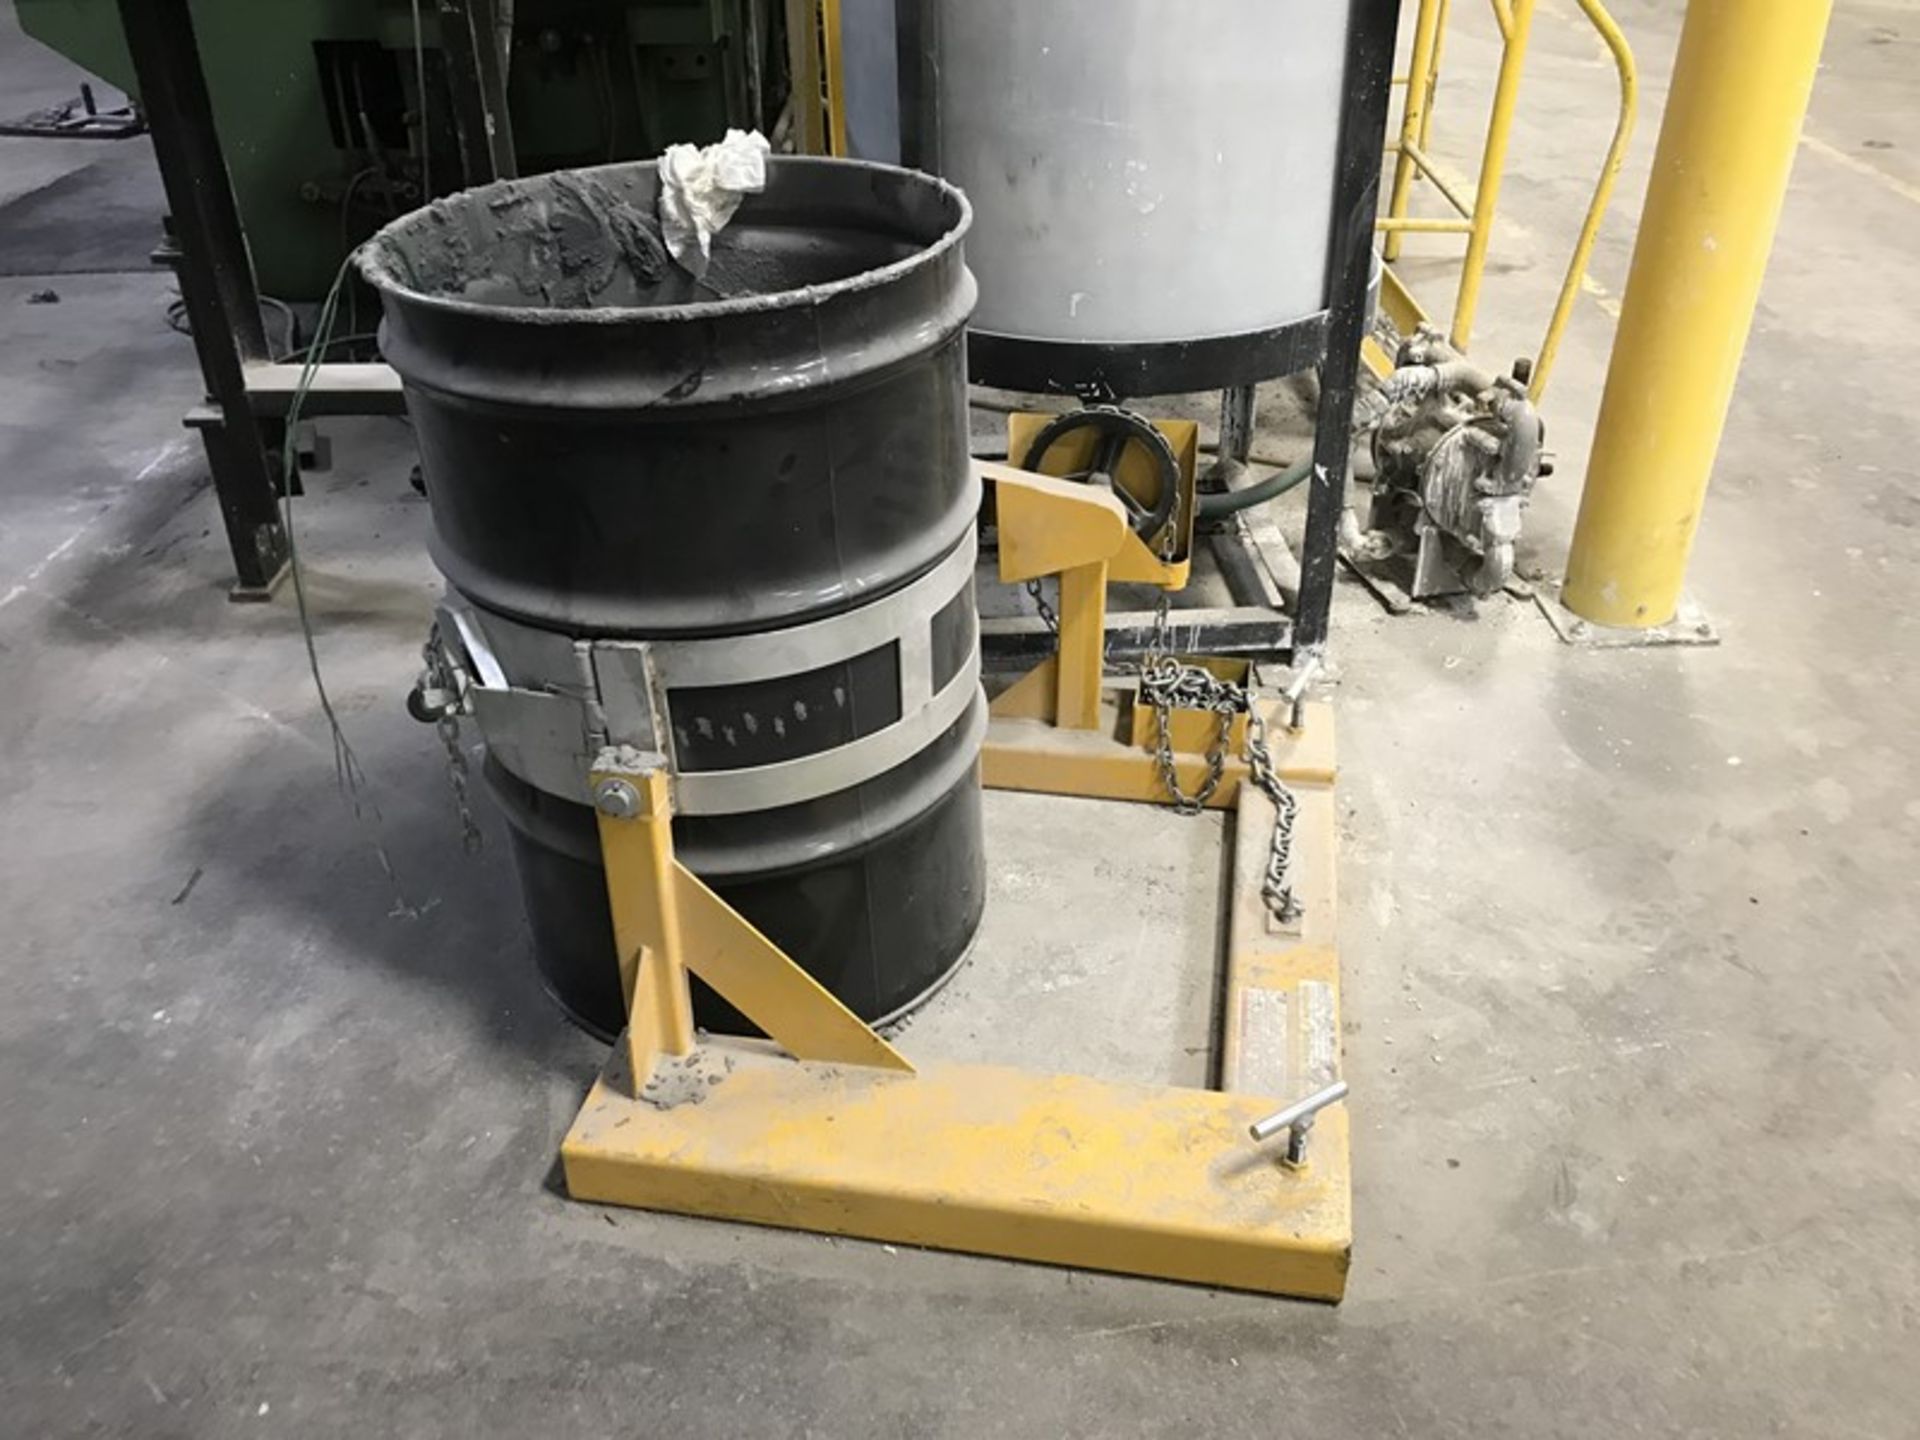 55 gallon drum tilting stand. - Image 2 of 5